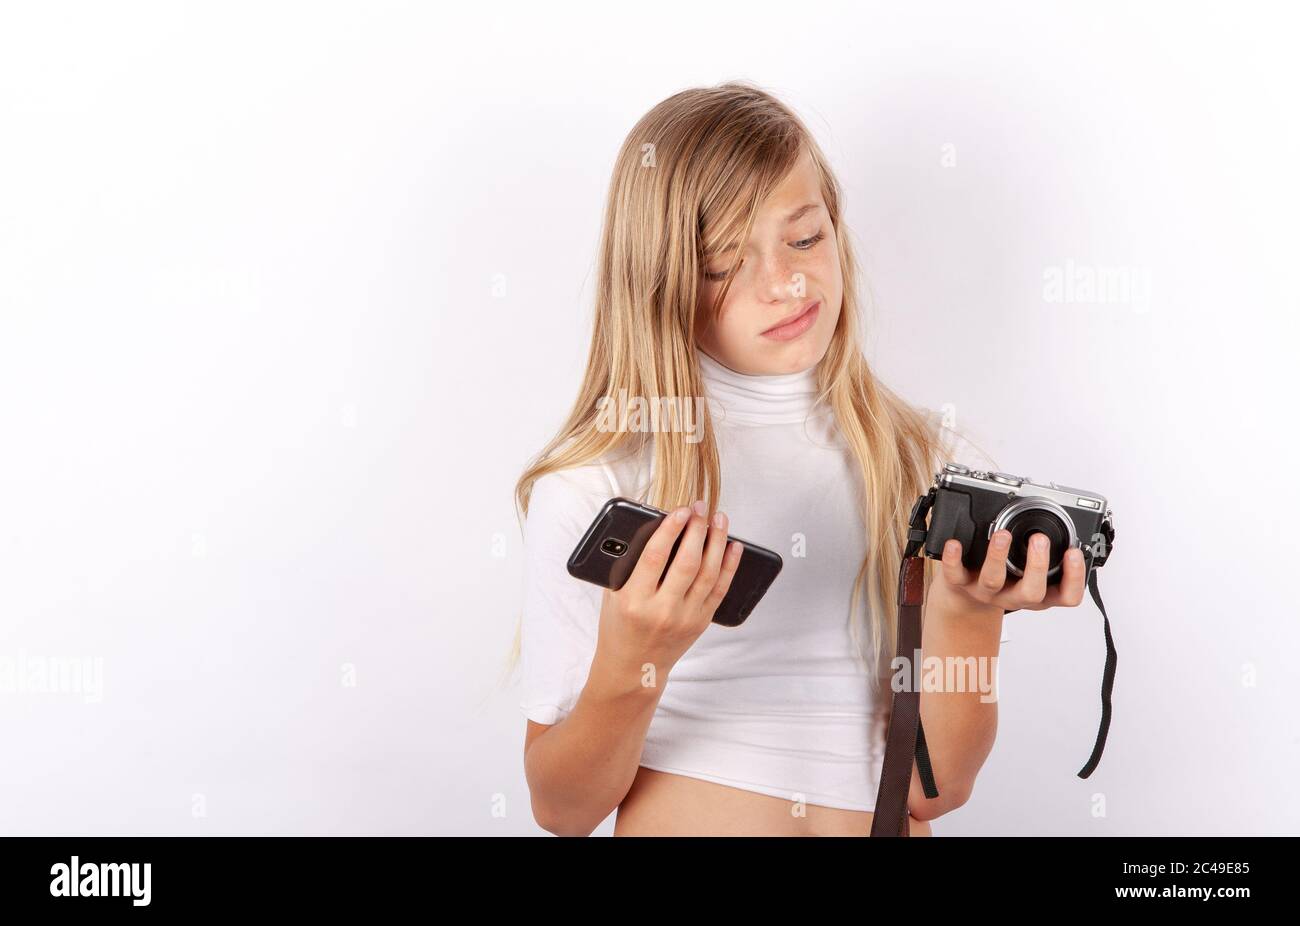 Young girl cant decide between smartphone and compact camera. Mobile phone versus classic camera concept Stock Photo